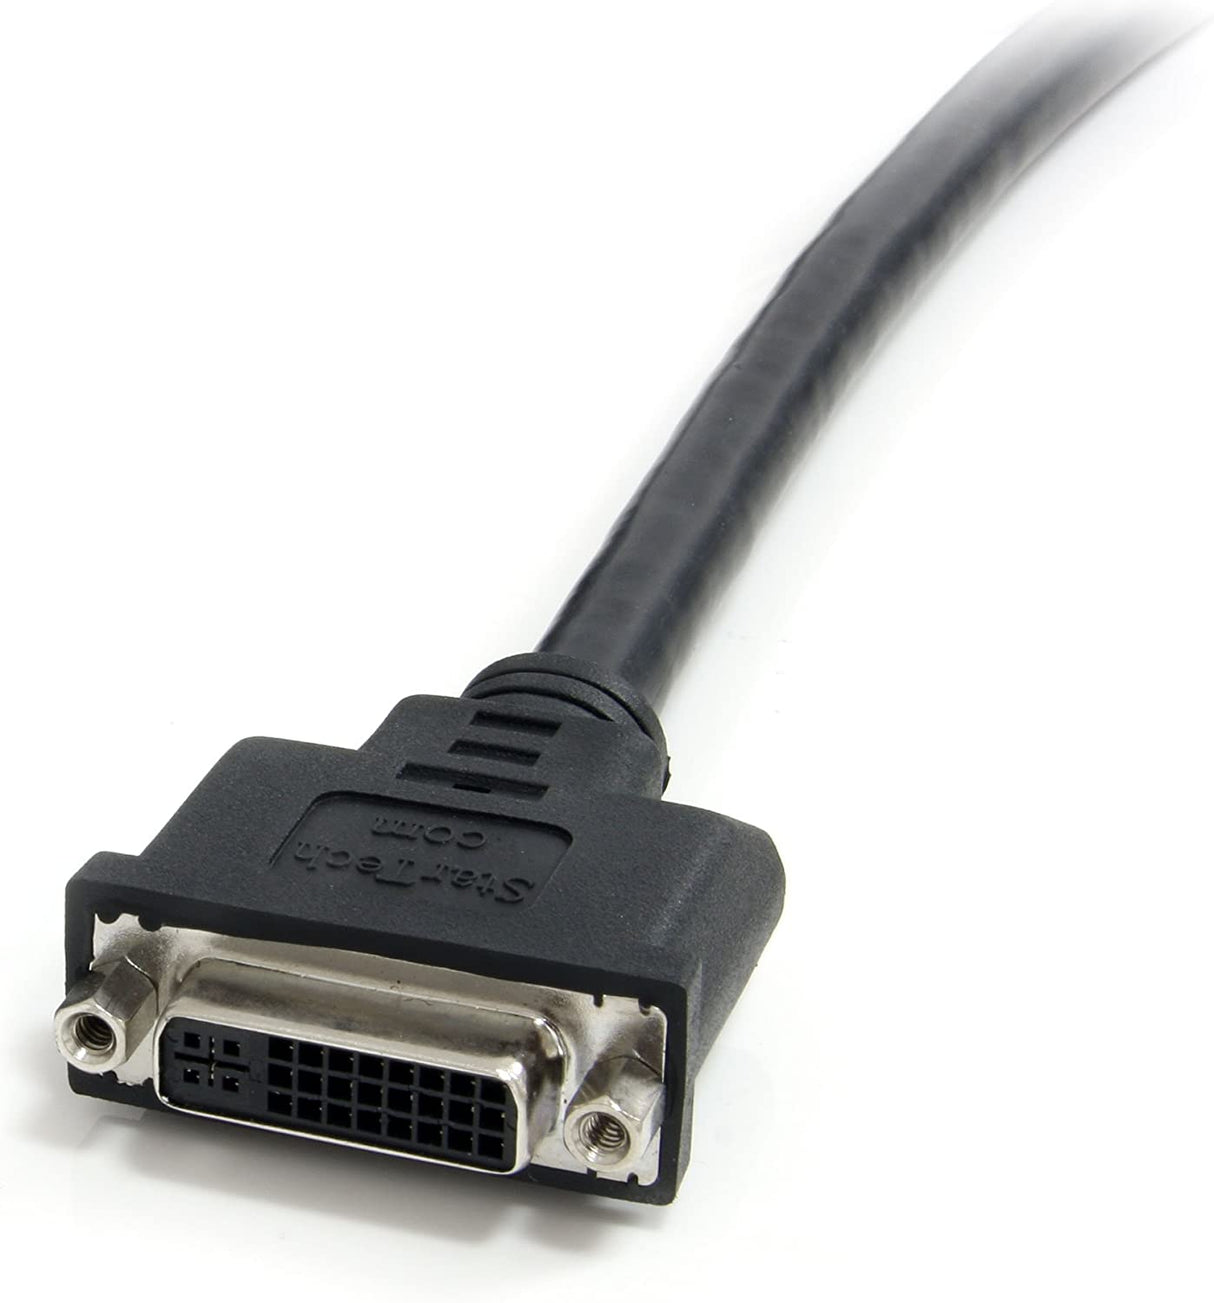 StarTech.com DVI-I Extension Cable - 6 ft - Dual Link - Digital and Analog - Male to Female Cable - Computer Monitor Cable - DVI Cord (DVIIDMF6)